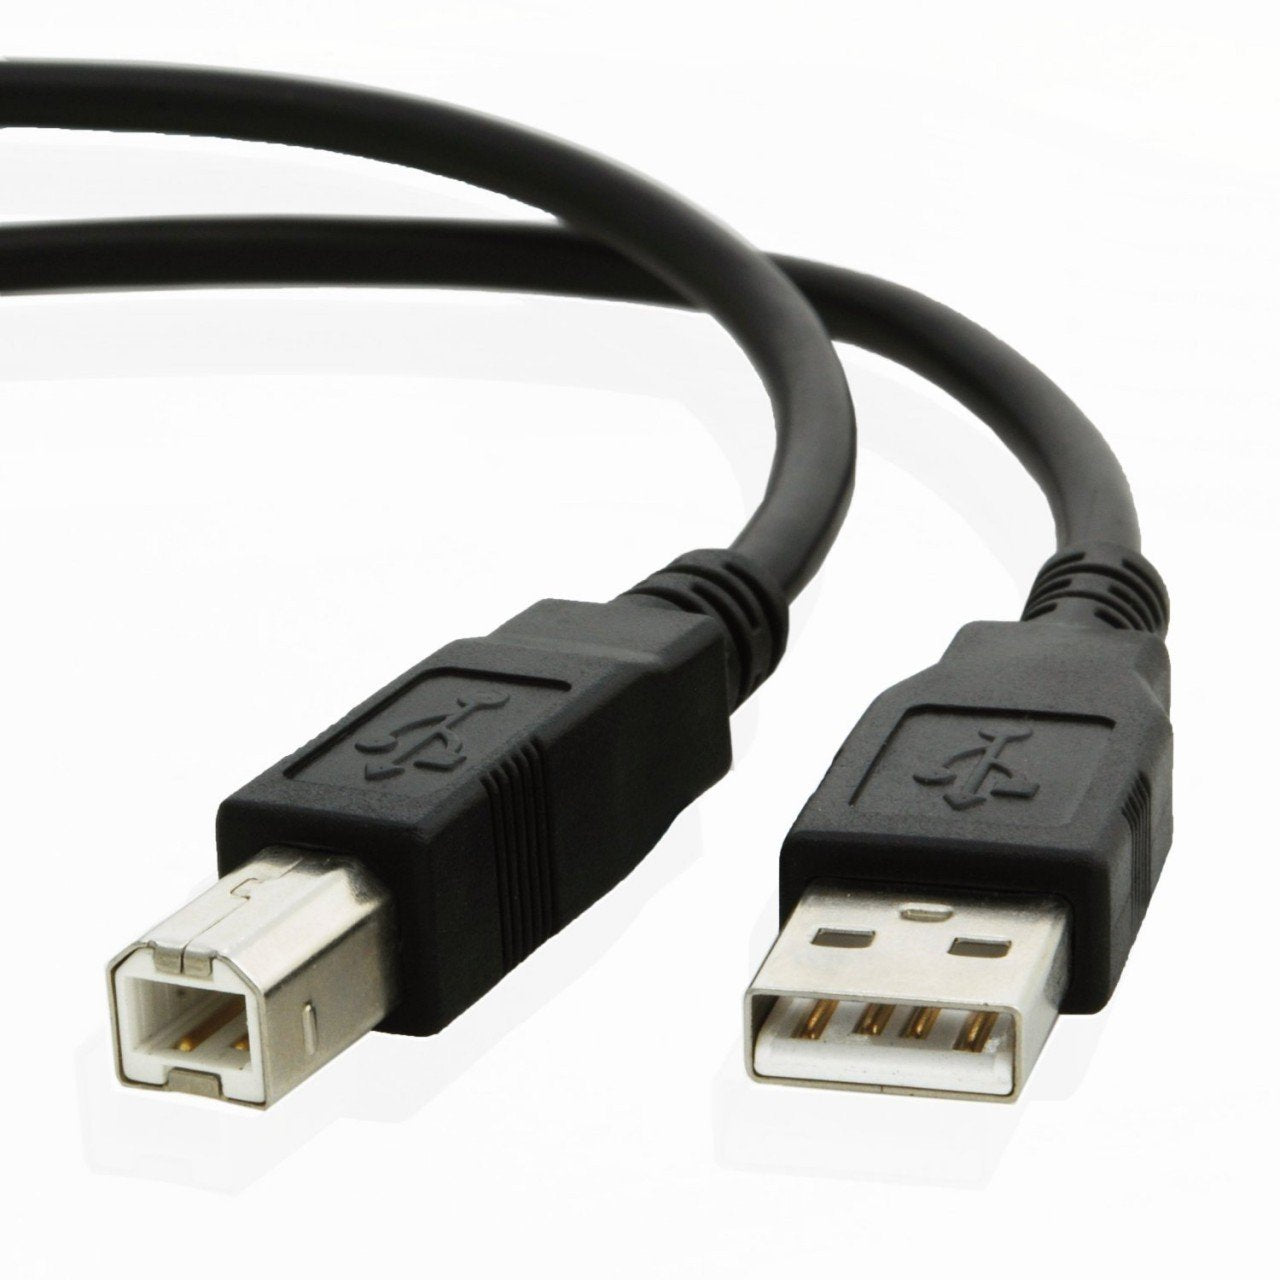 USB cable for Casio KEYBOARD WK-7500